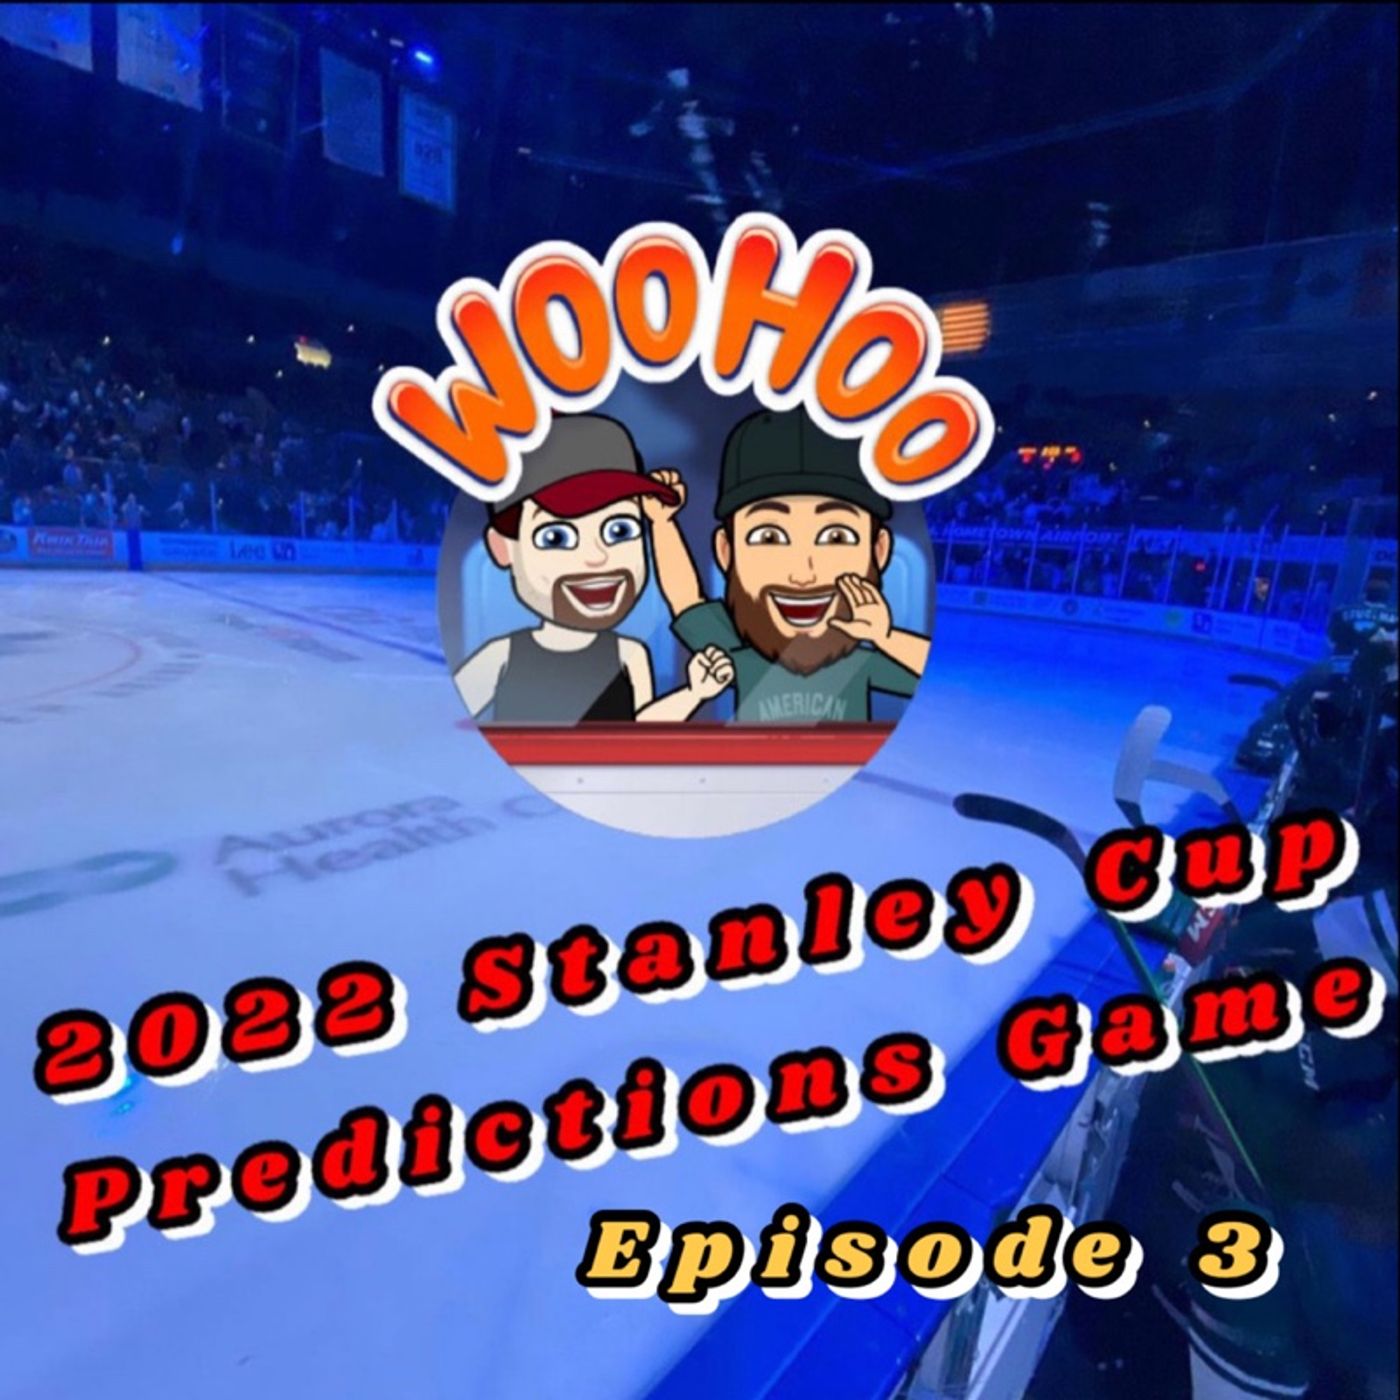 2022 Stanley Cup Predictions Game Episode 3